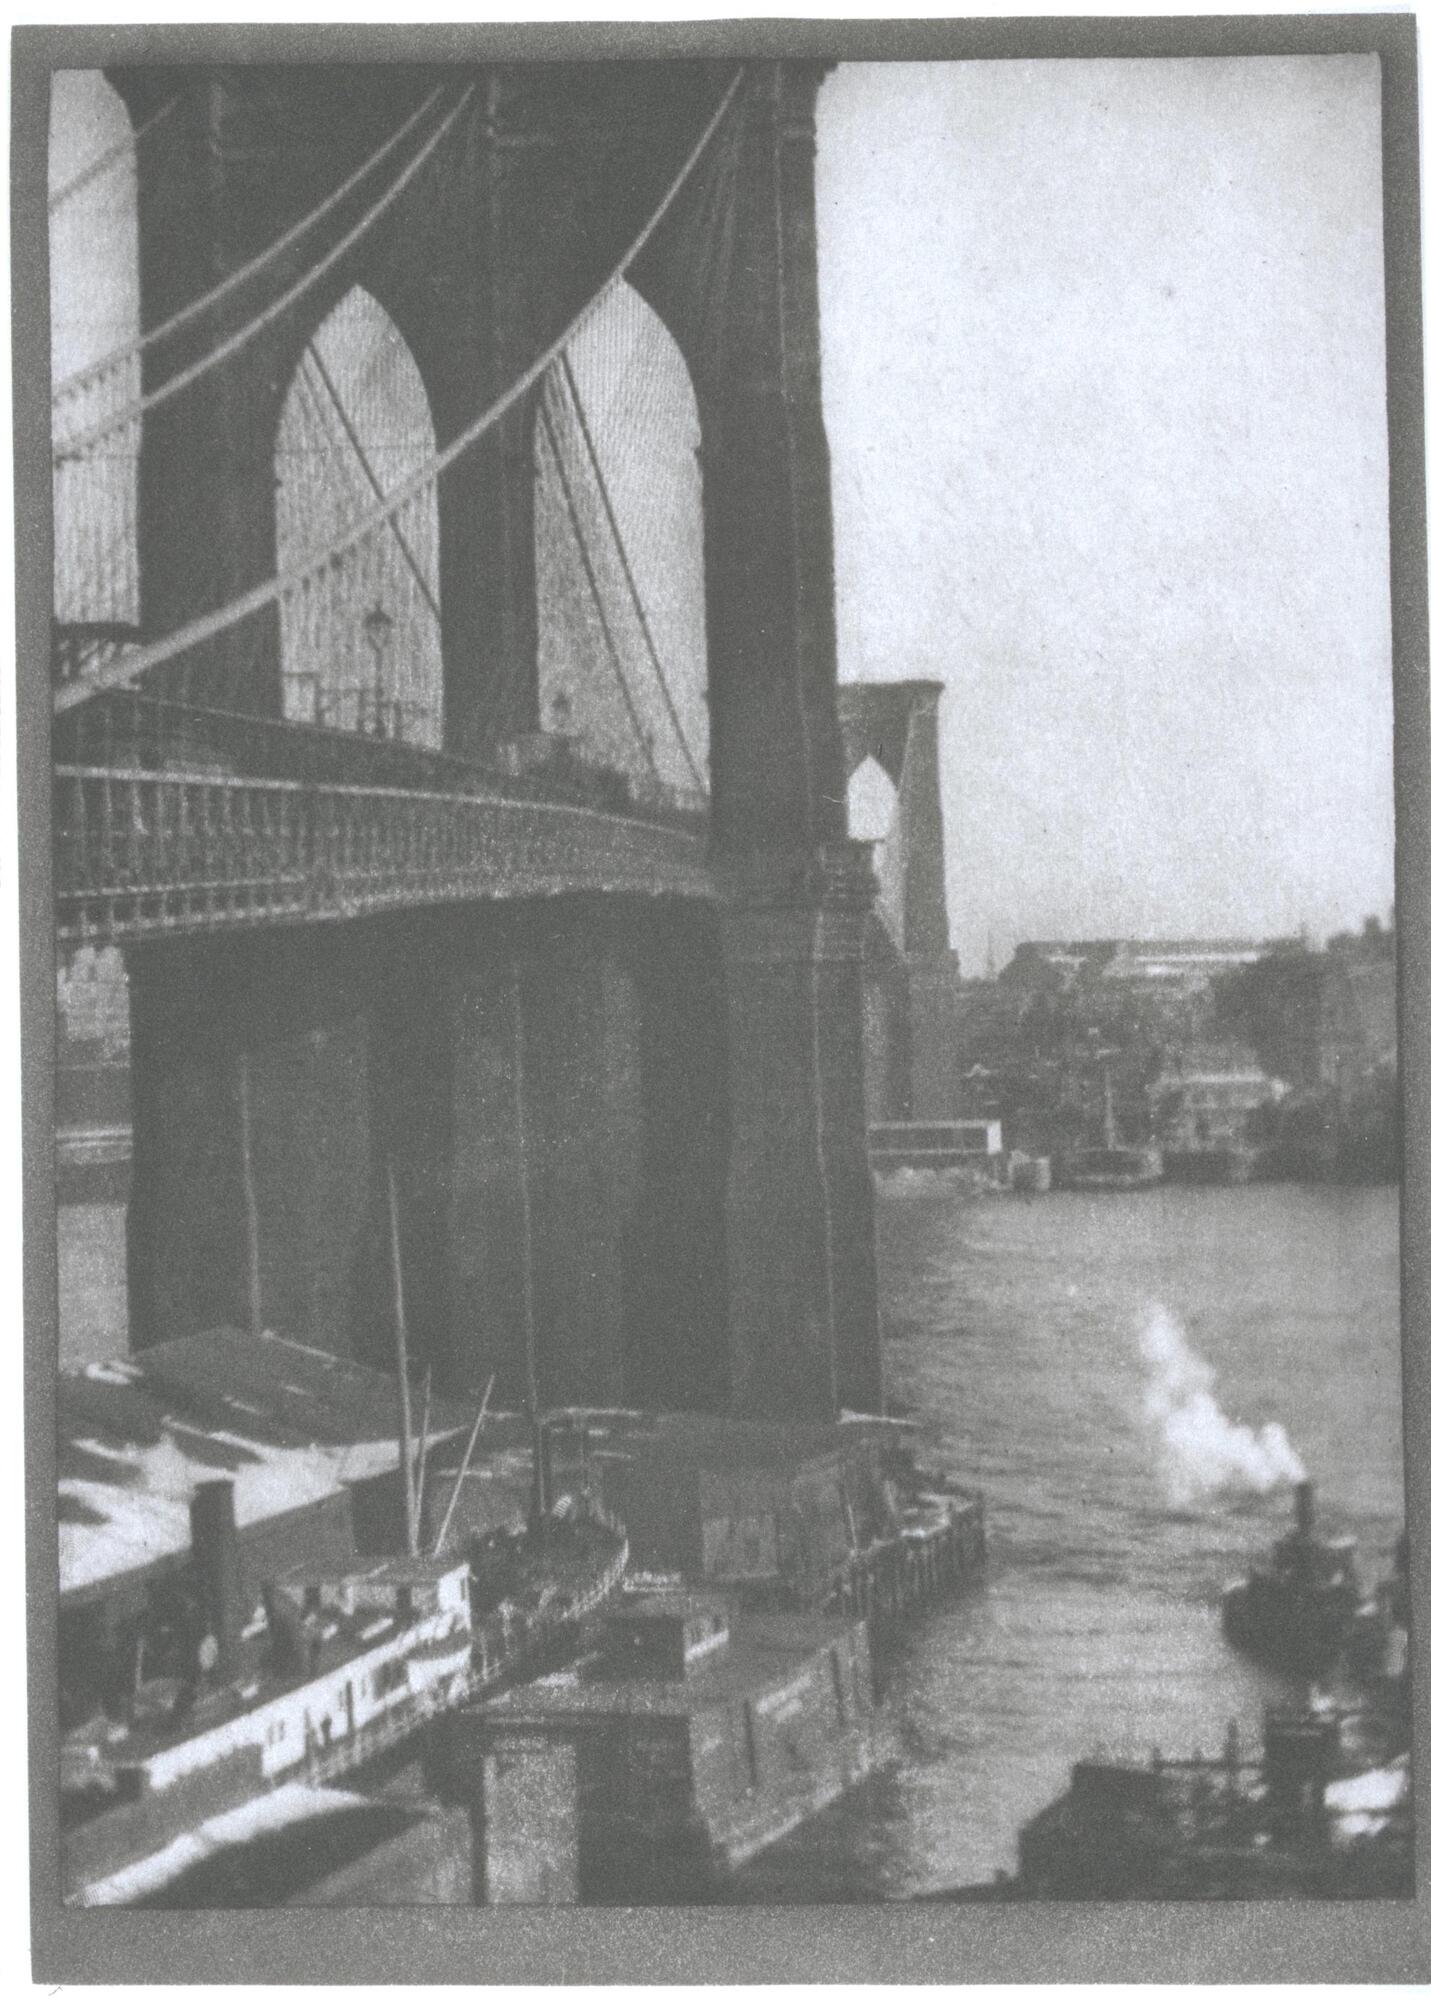 This photograph depicts an oblique view of the Brooklyn Bridge. The bridge dominates over half of the frame starting on the left and reaching into the background, while the right side represents the river and boats underneath the bridge.